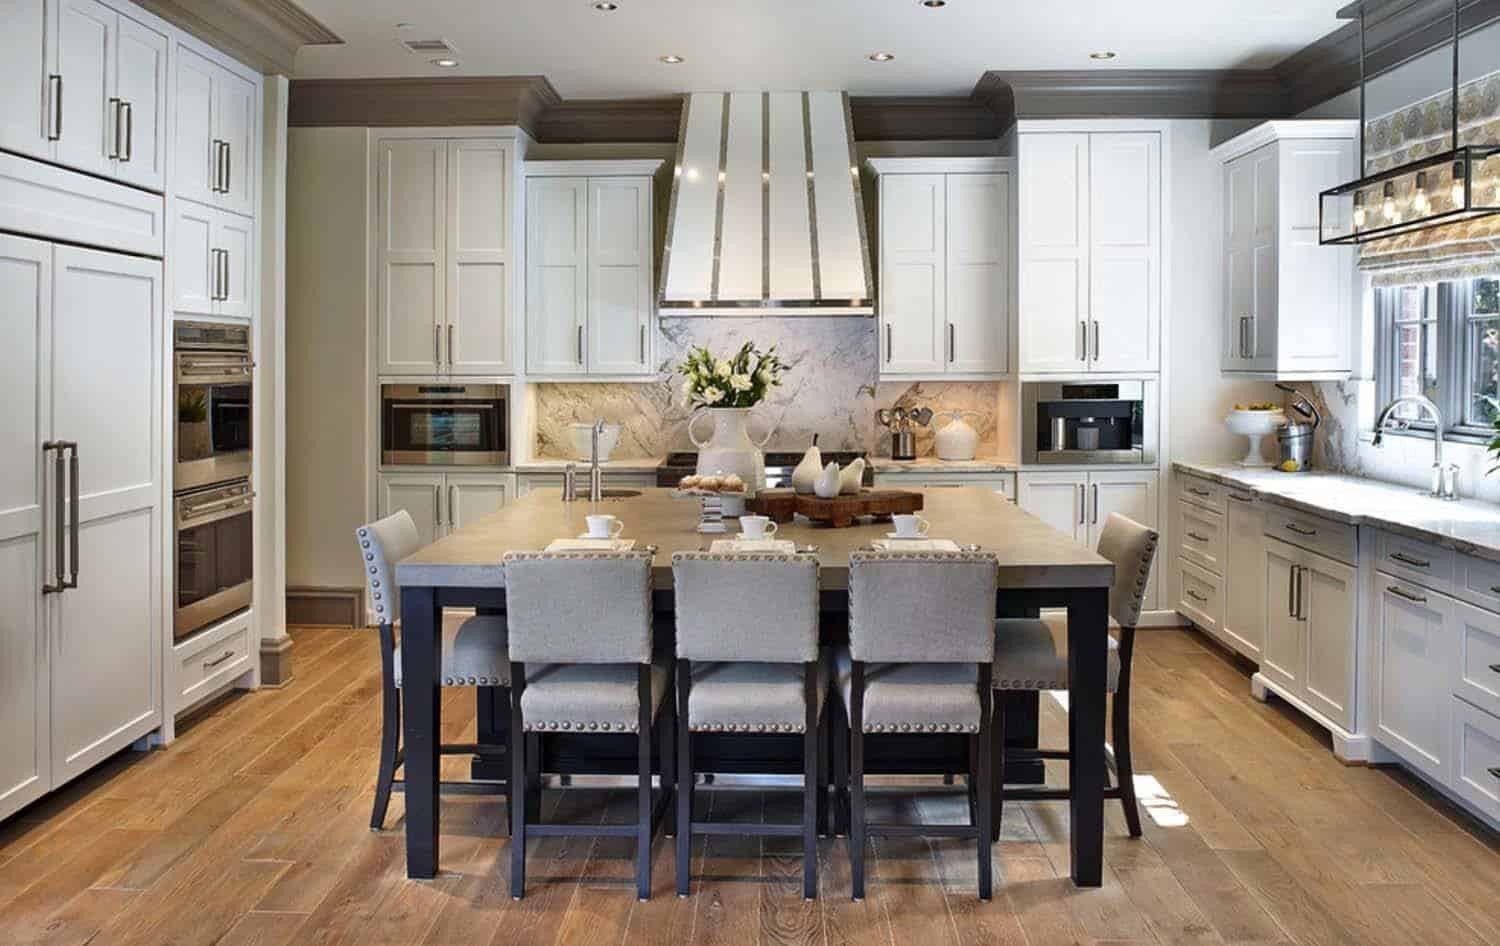 Small Kitchen Islands With Seating
 30 Brilliant kitchen island ideas that make a statement